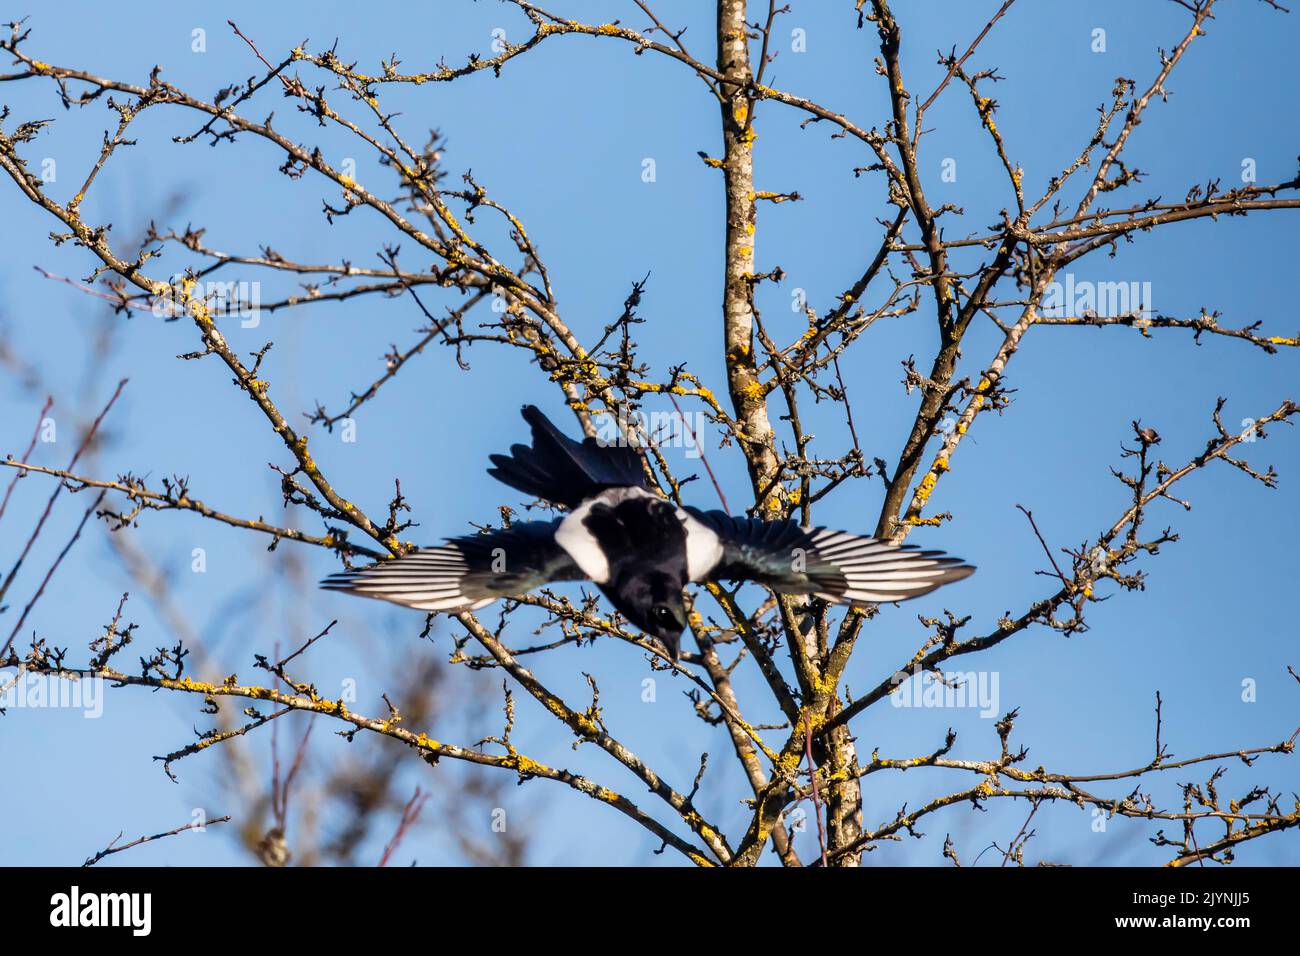 Black-billed Magpie (Pica pica) flying in a tree in winter, Glade on the edge of a forest, near Toul, Lorraine, France Stock Photo